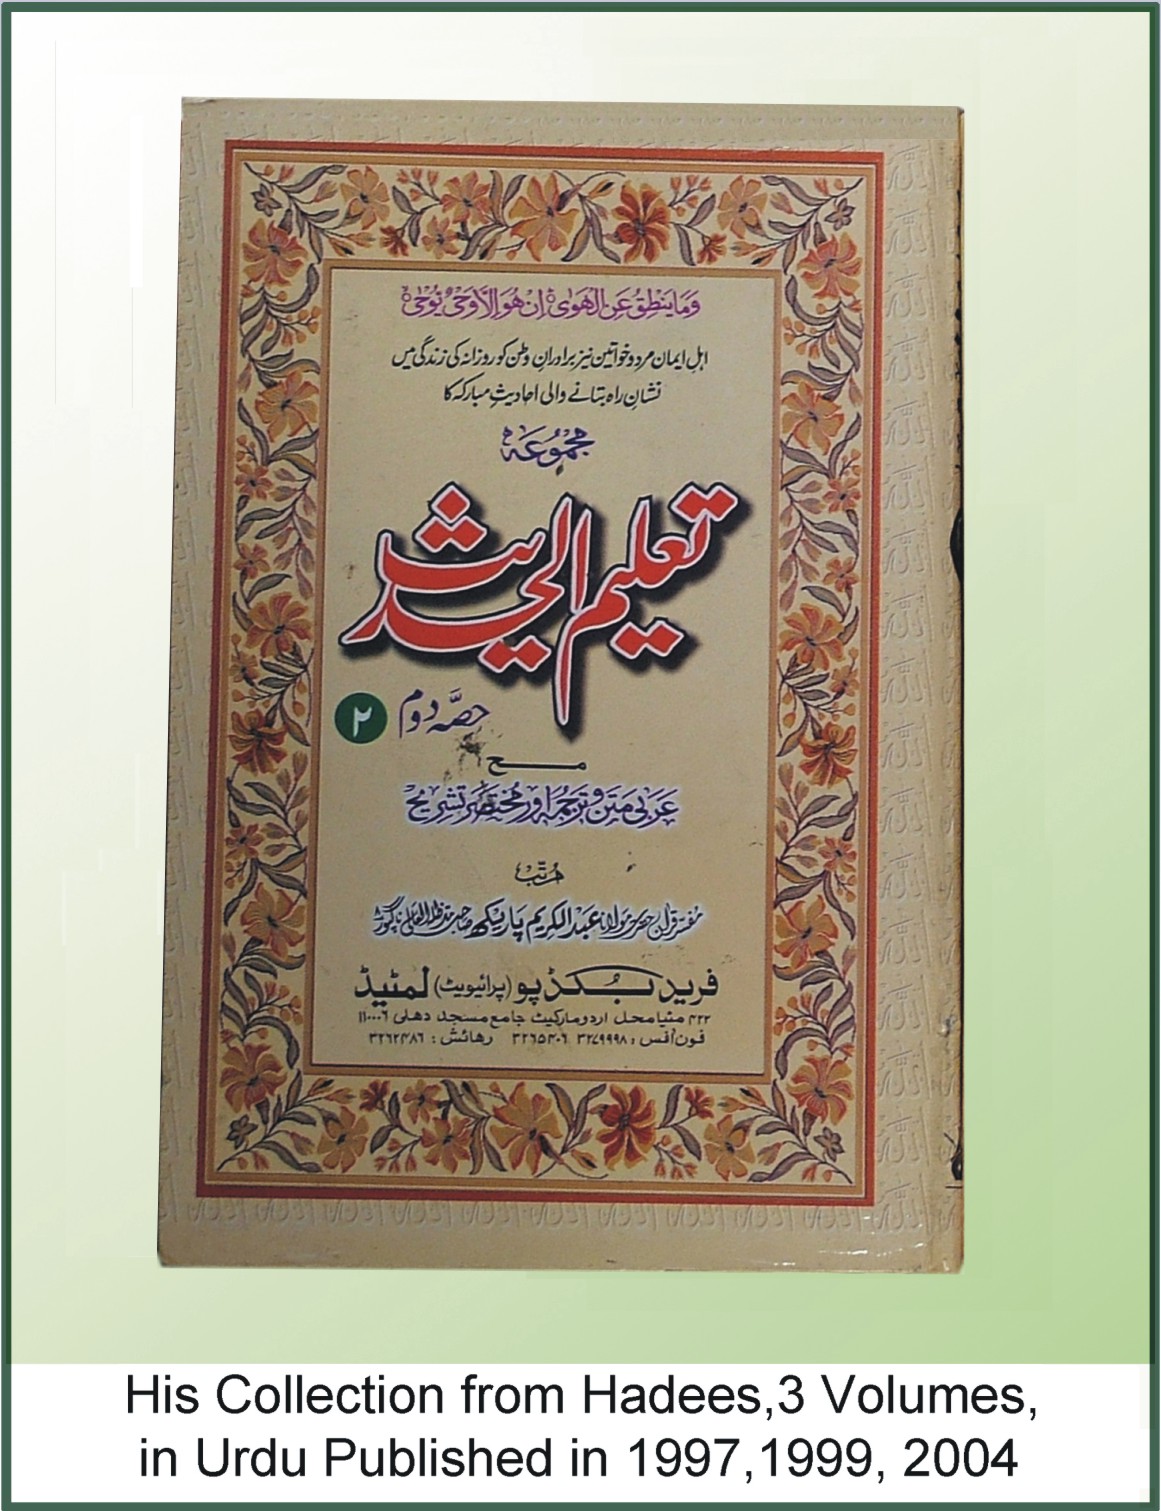 Collection from Hadees, 3 Volumes (Urdu) First Published in 1997, 1999 & 2004 respectively